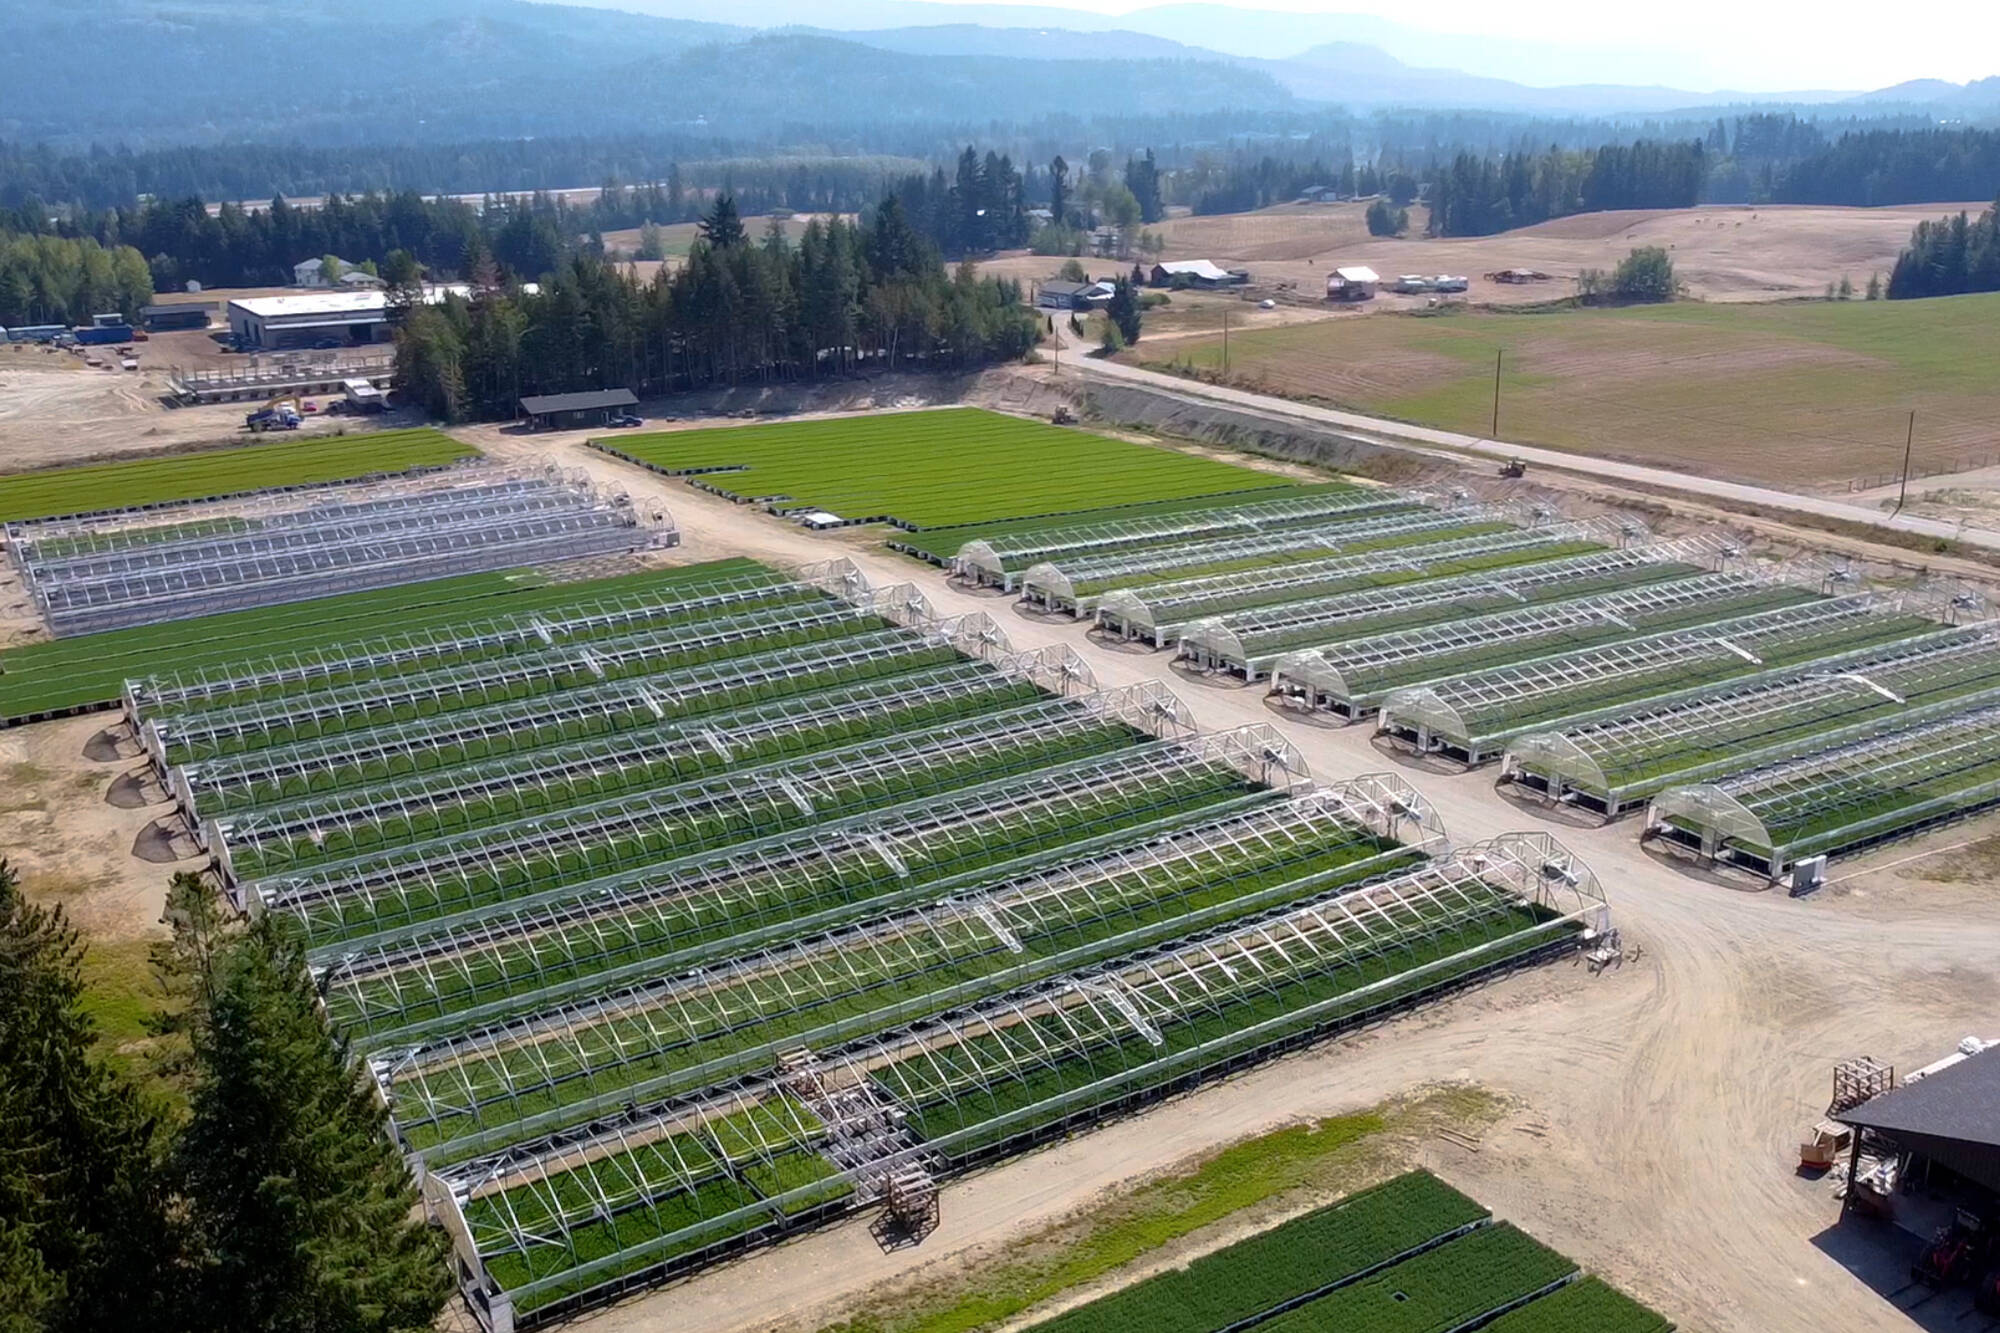 Salmon Arm’s Mt. Ida Nursery commercial tree seedling nursery that grows seedlings for BC Timber Sales, private forest companies and woodlots. (Mt. Ida Nursery photo)